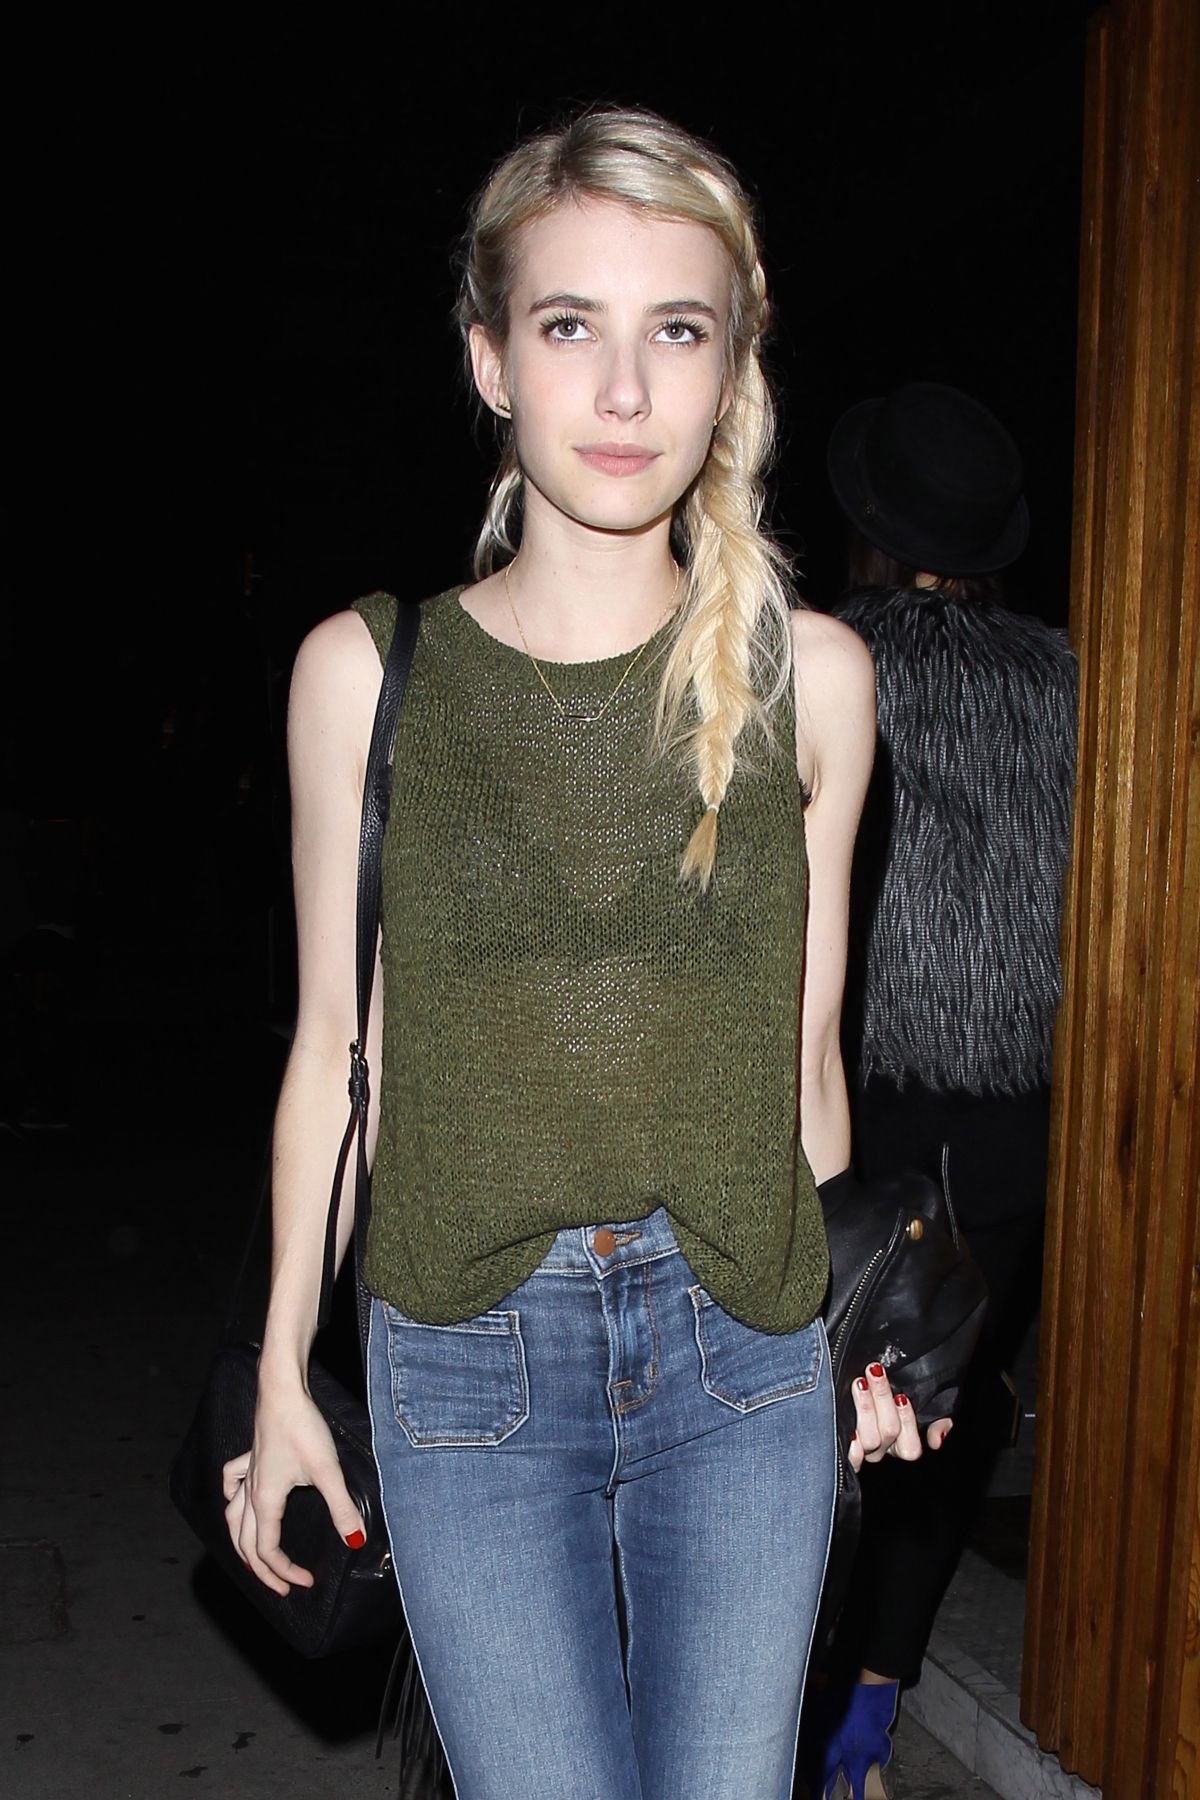 EMMA ROBERTS at Nice Guy in West Hollywood 06/11/2015 - HawtCelebs1200 x 1800